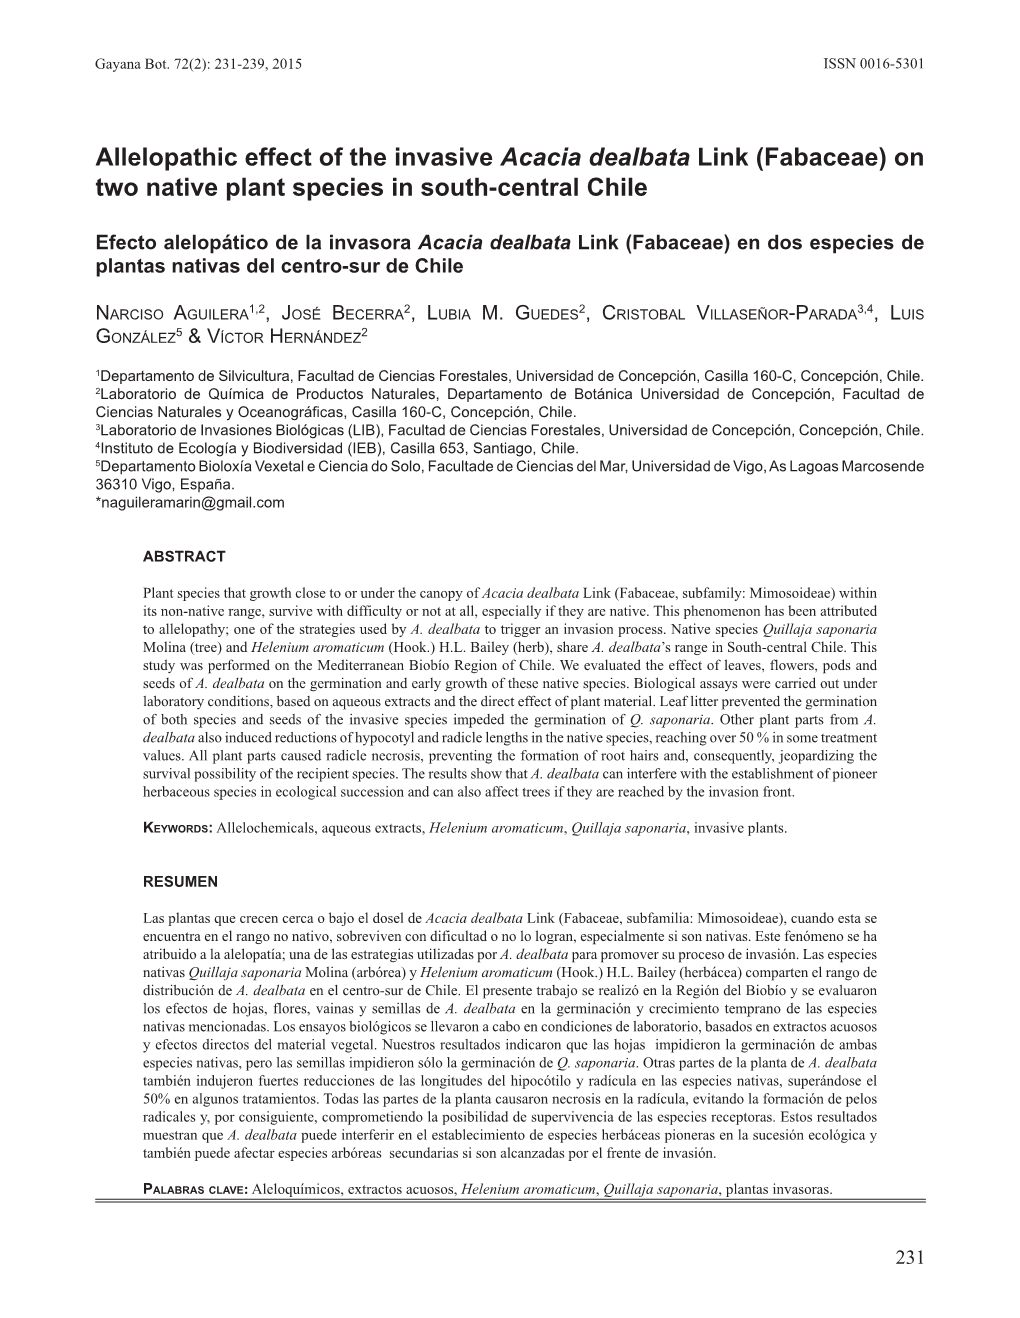 Allelopathic Effect of the Invasive Acacia Dealbata Link (Fabaceae) on Two Native Plant Species in South-Central Chile